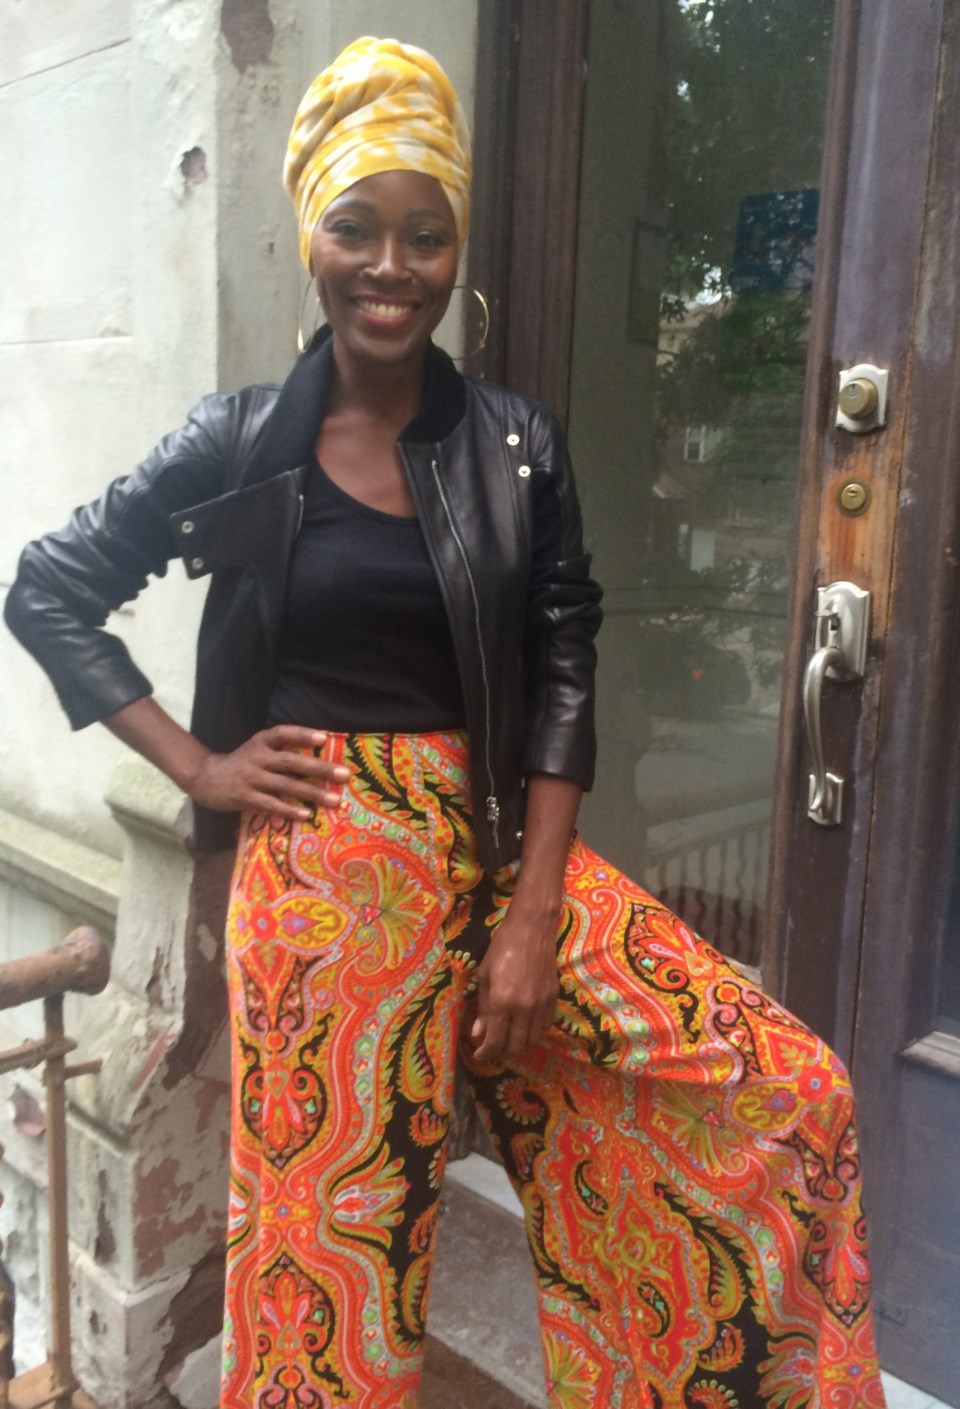 Sheryl Roberts poses in a Indigo Style Vintage ensemble in front of her Greene Ave house. Black leather jacket over a black shirt on top of loose orange patterned trouser skirt